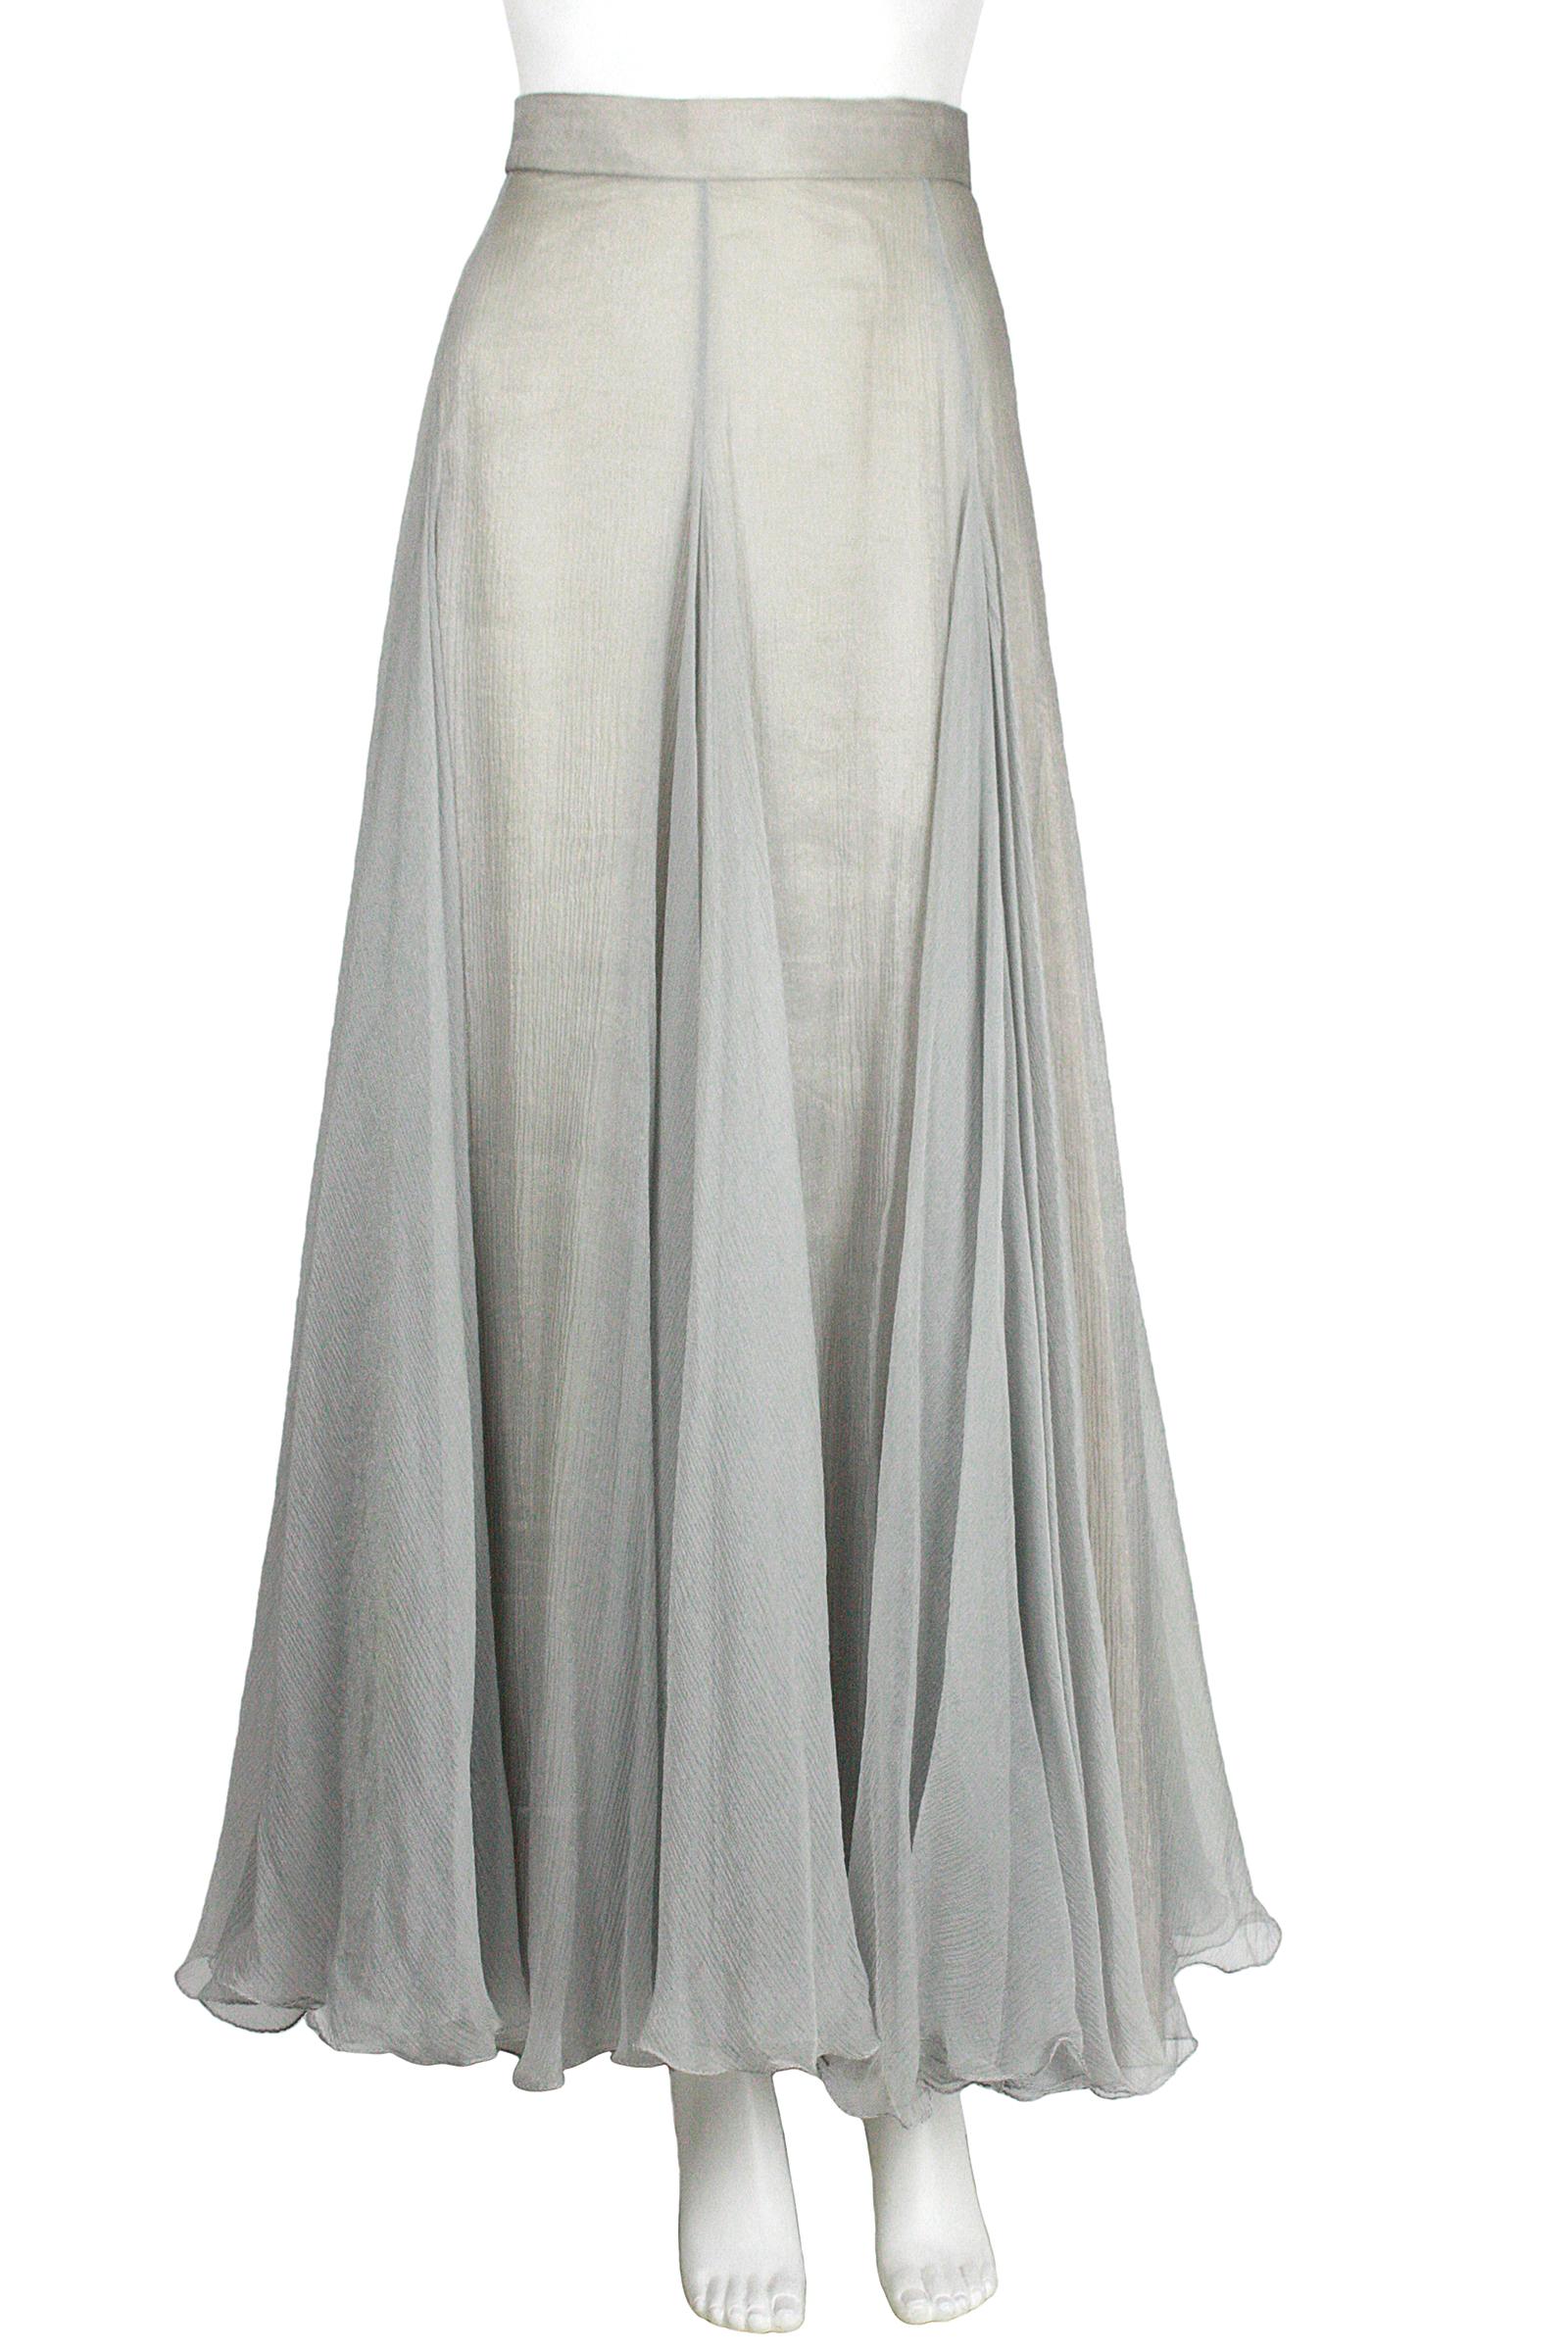 Eavis & Brown London Seafoam Chiffon Beaded Top and Long Silver Skirt  For Sale 4